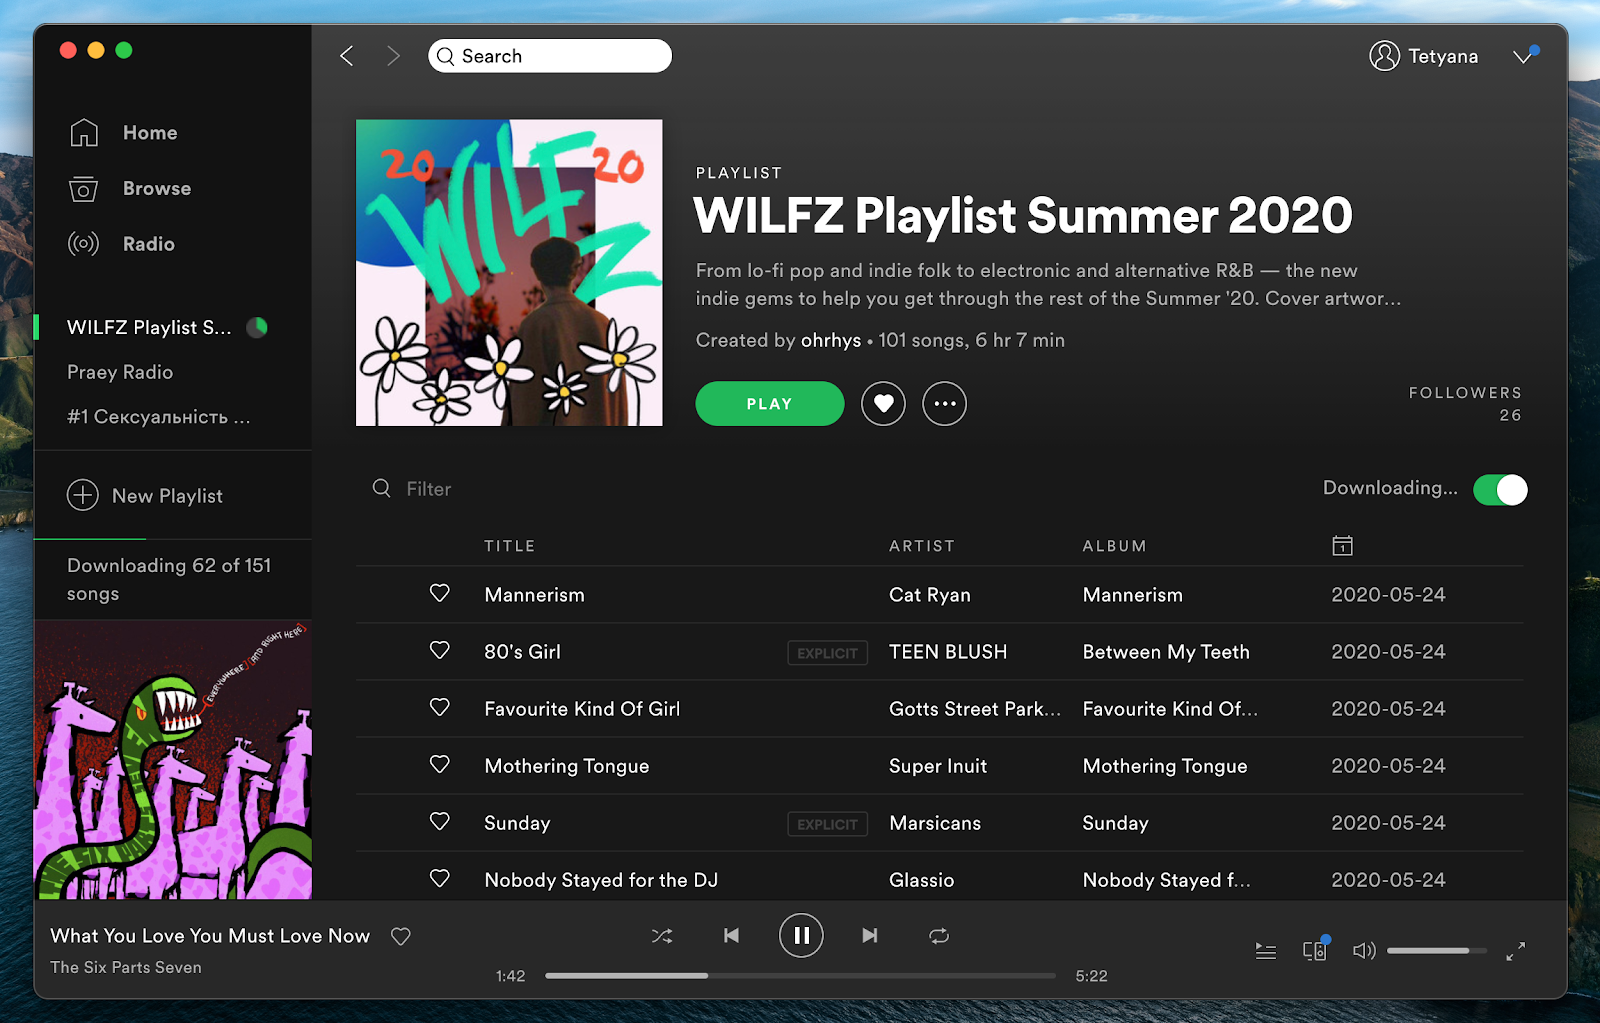 how to download spotify playlists without premium